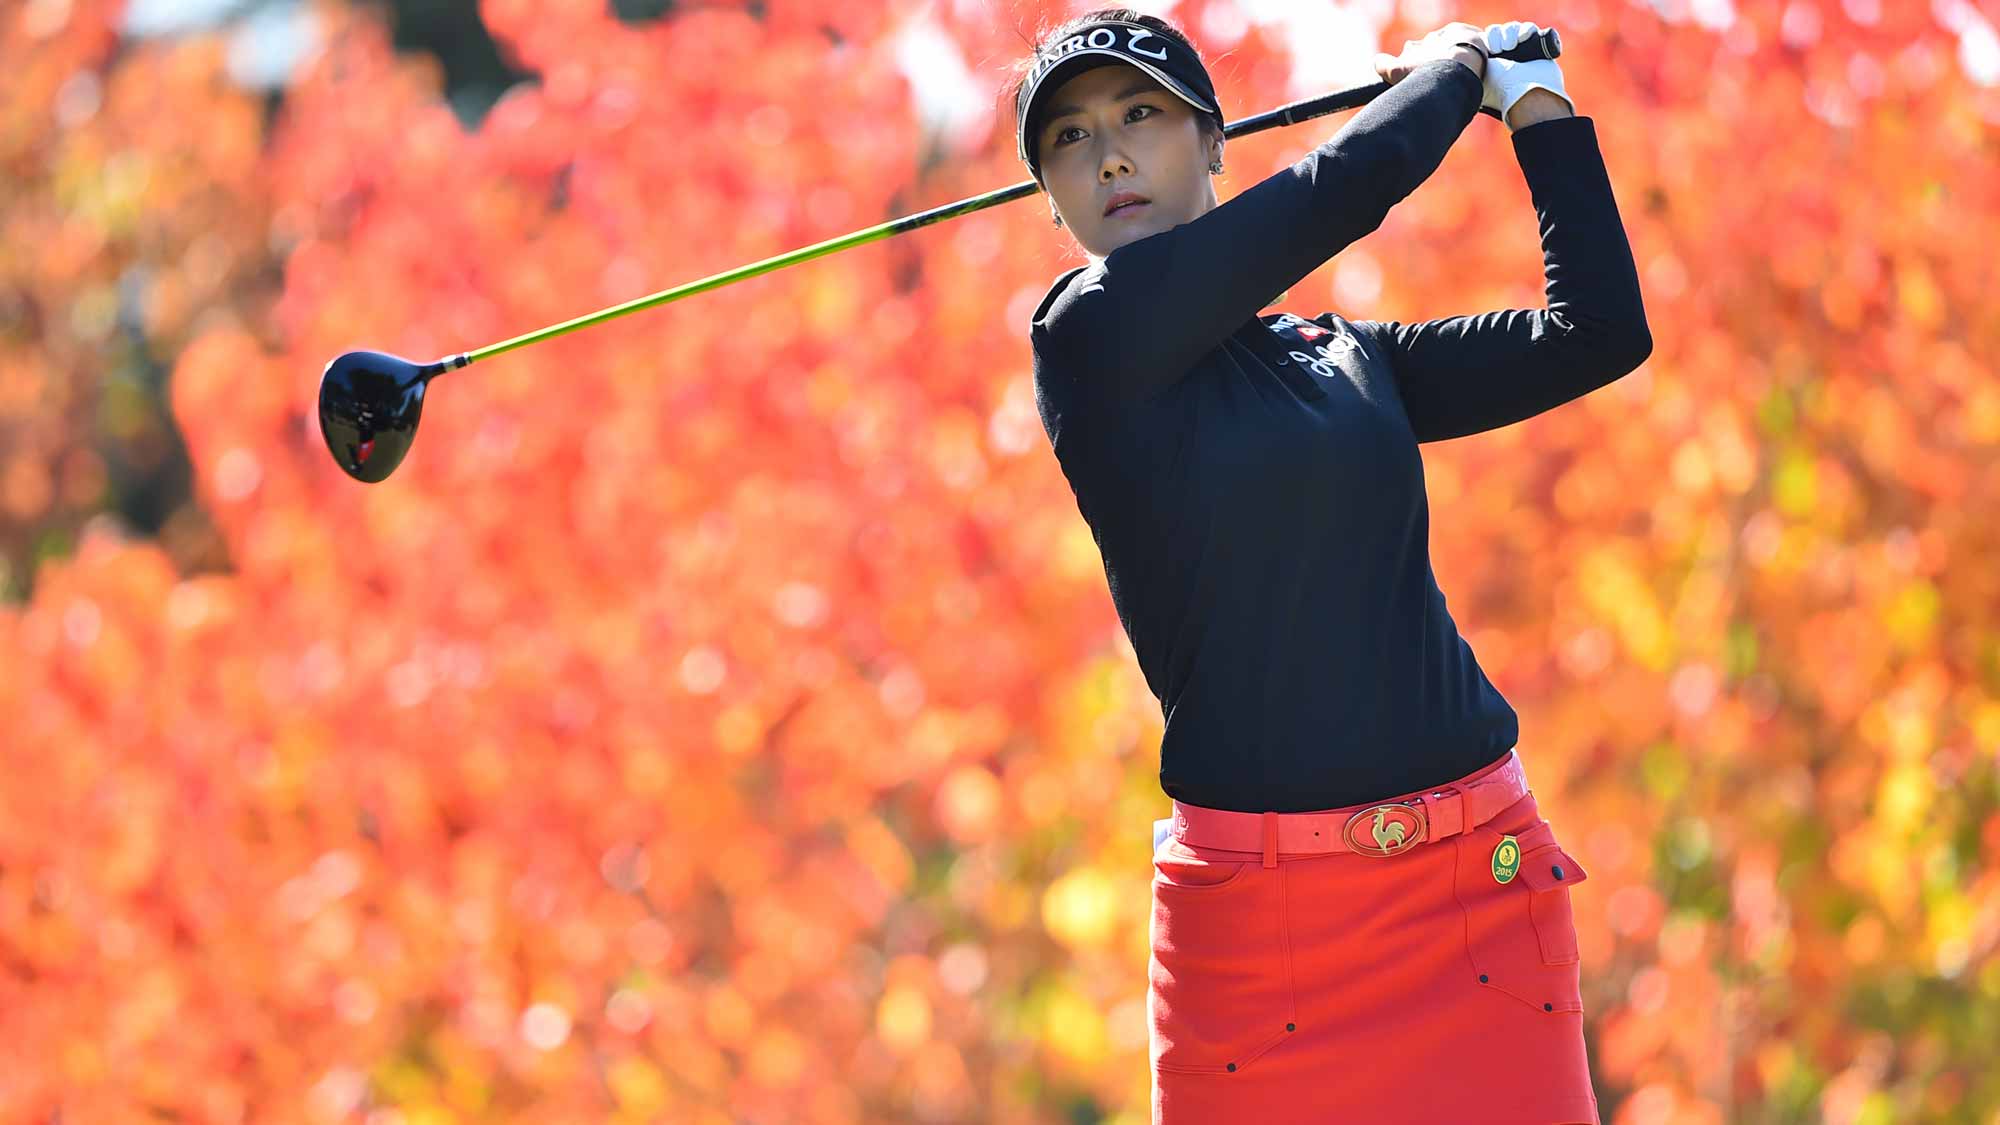 Ha-Neul Kim of South Korea hits her tee shot on the 2nd hole during the first round of the TOTO Japan Classics 2015 at the Kintetsu Kashikojima Country Club